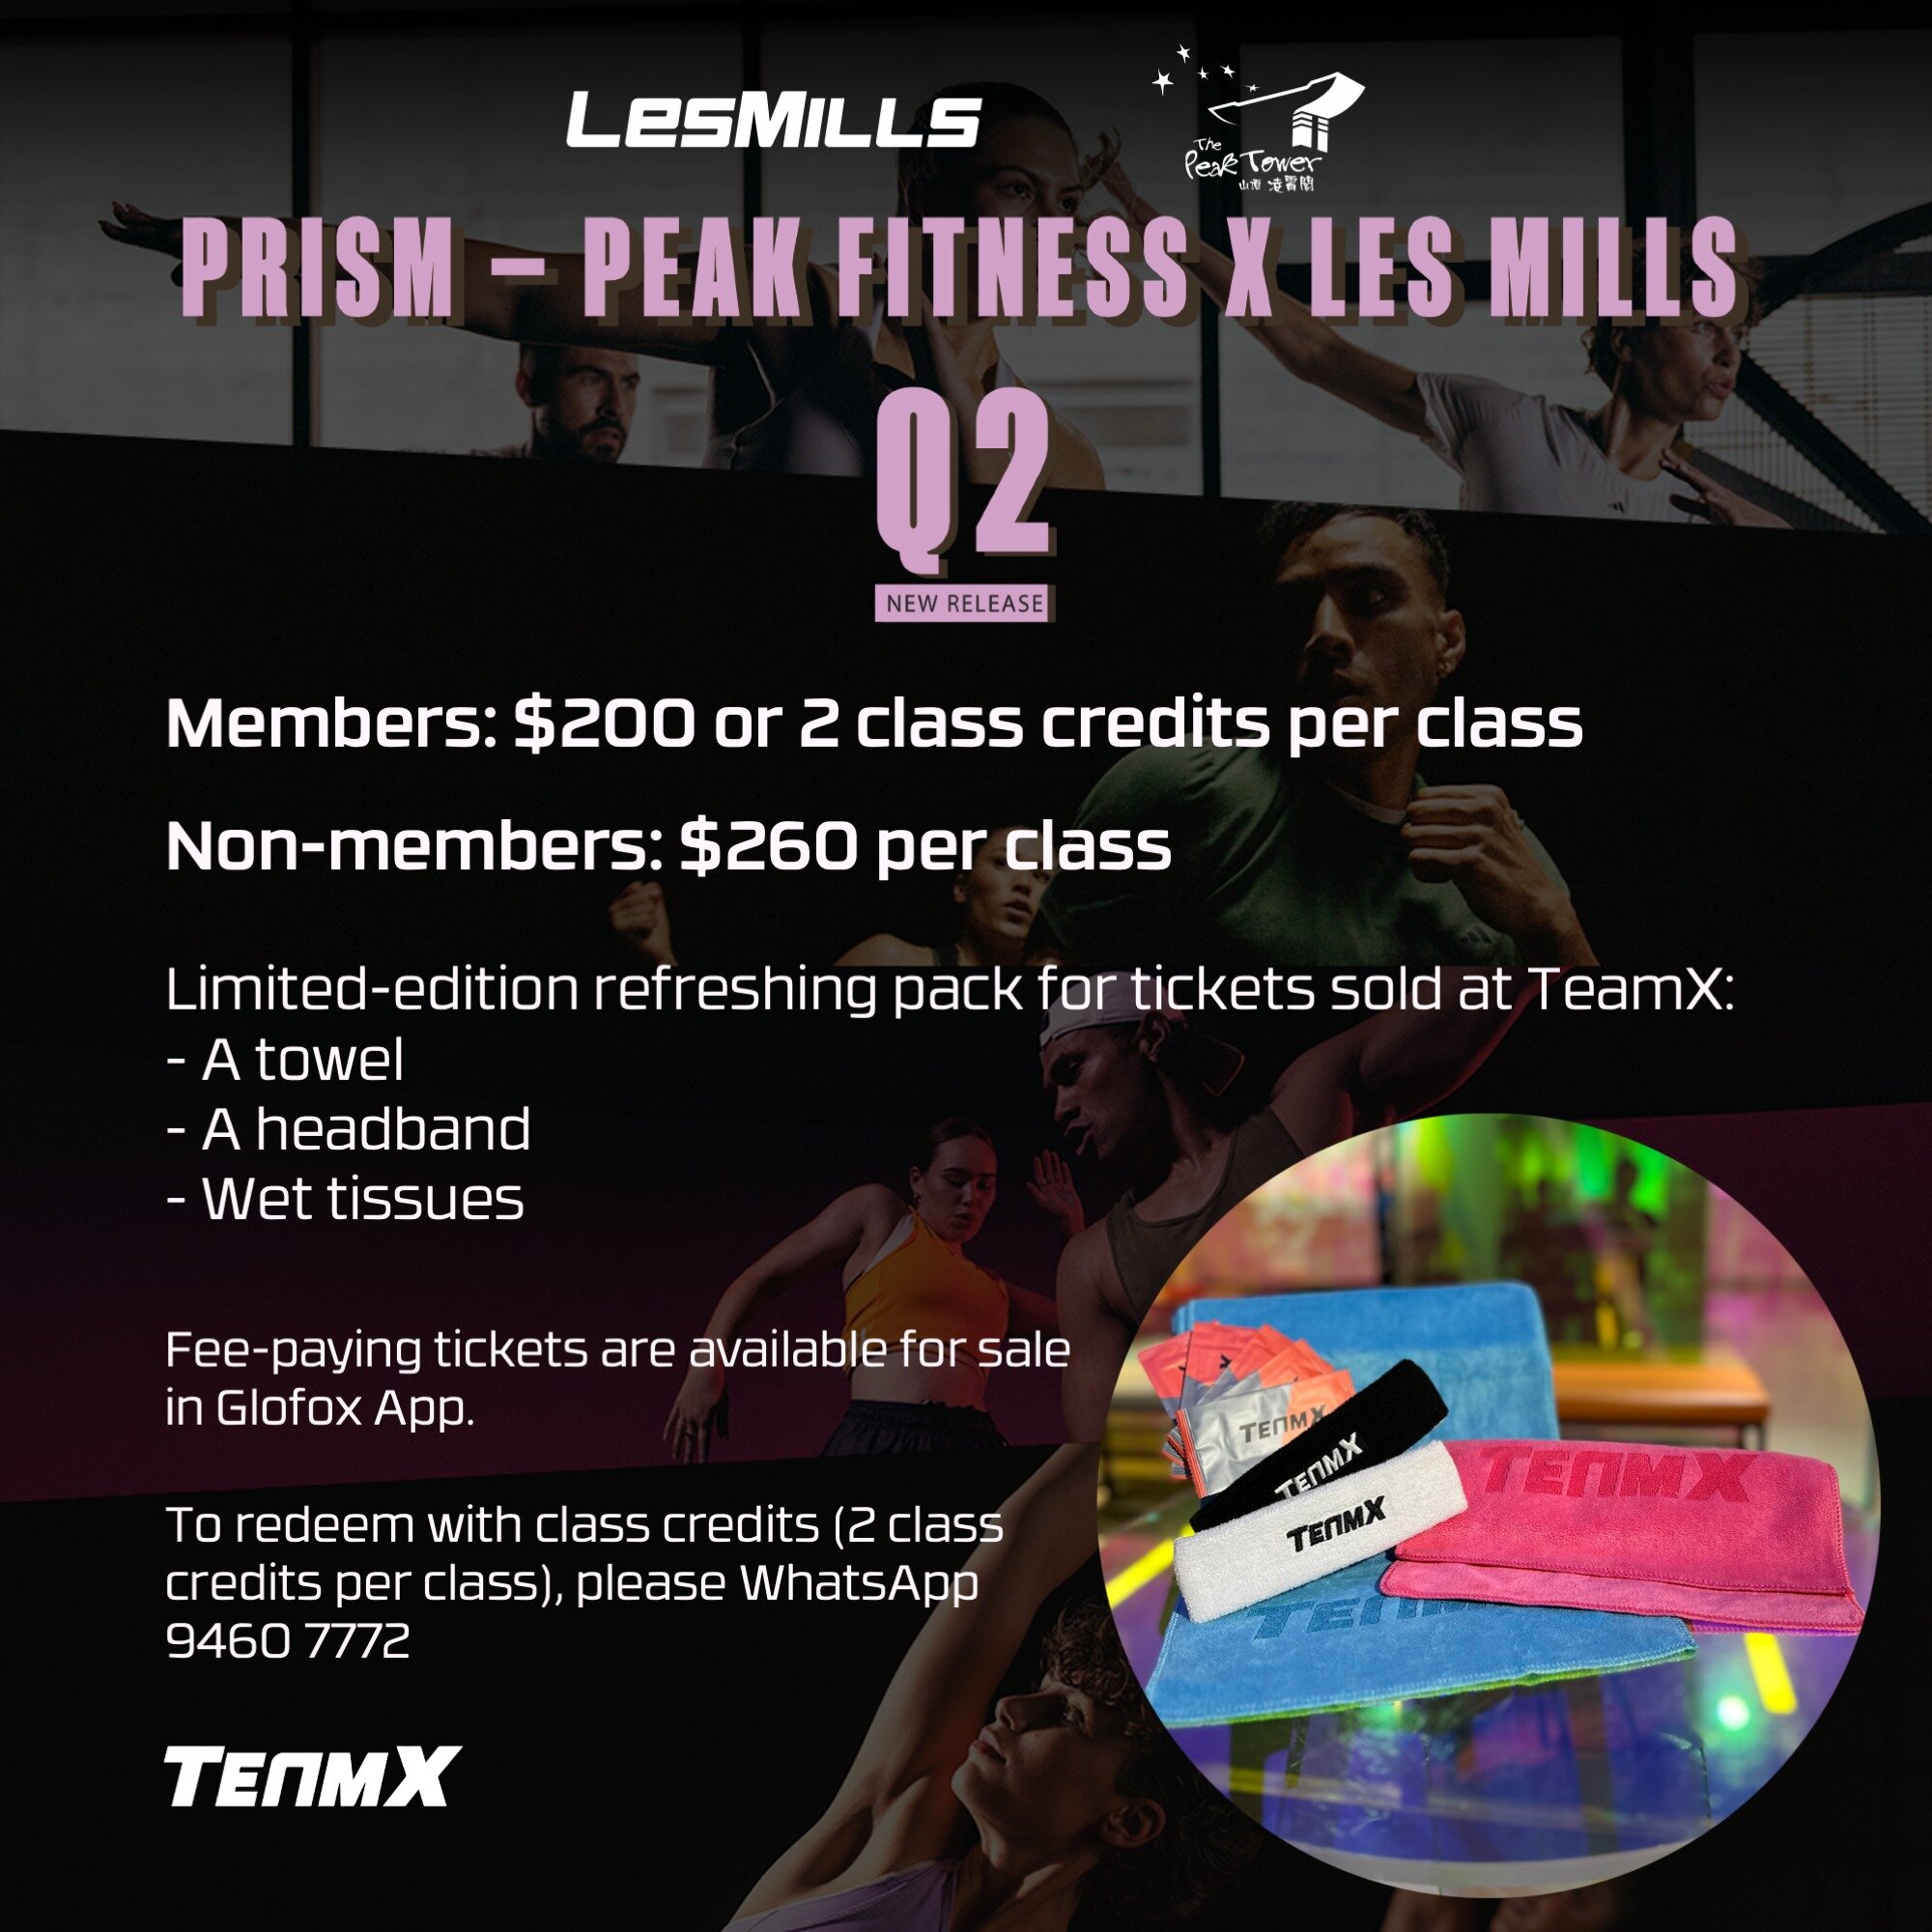 Get the rare chance to be first to experience brand new Les Mills workout with presenter team and the iconic Victoria Harbour skyline!

Tickets are available for sale in Glofox now, active TeamX monthly plan and credit pack holders could enjoy a spec